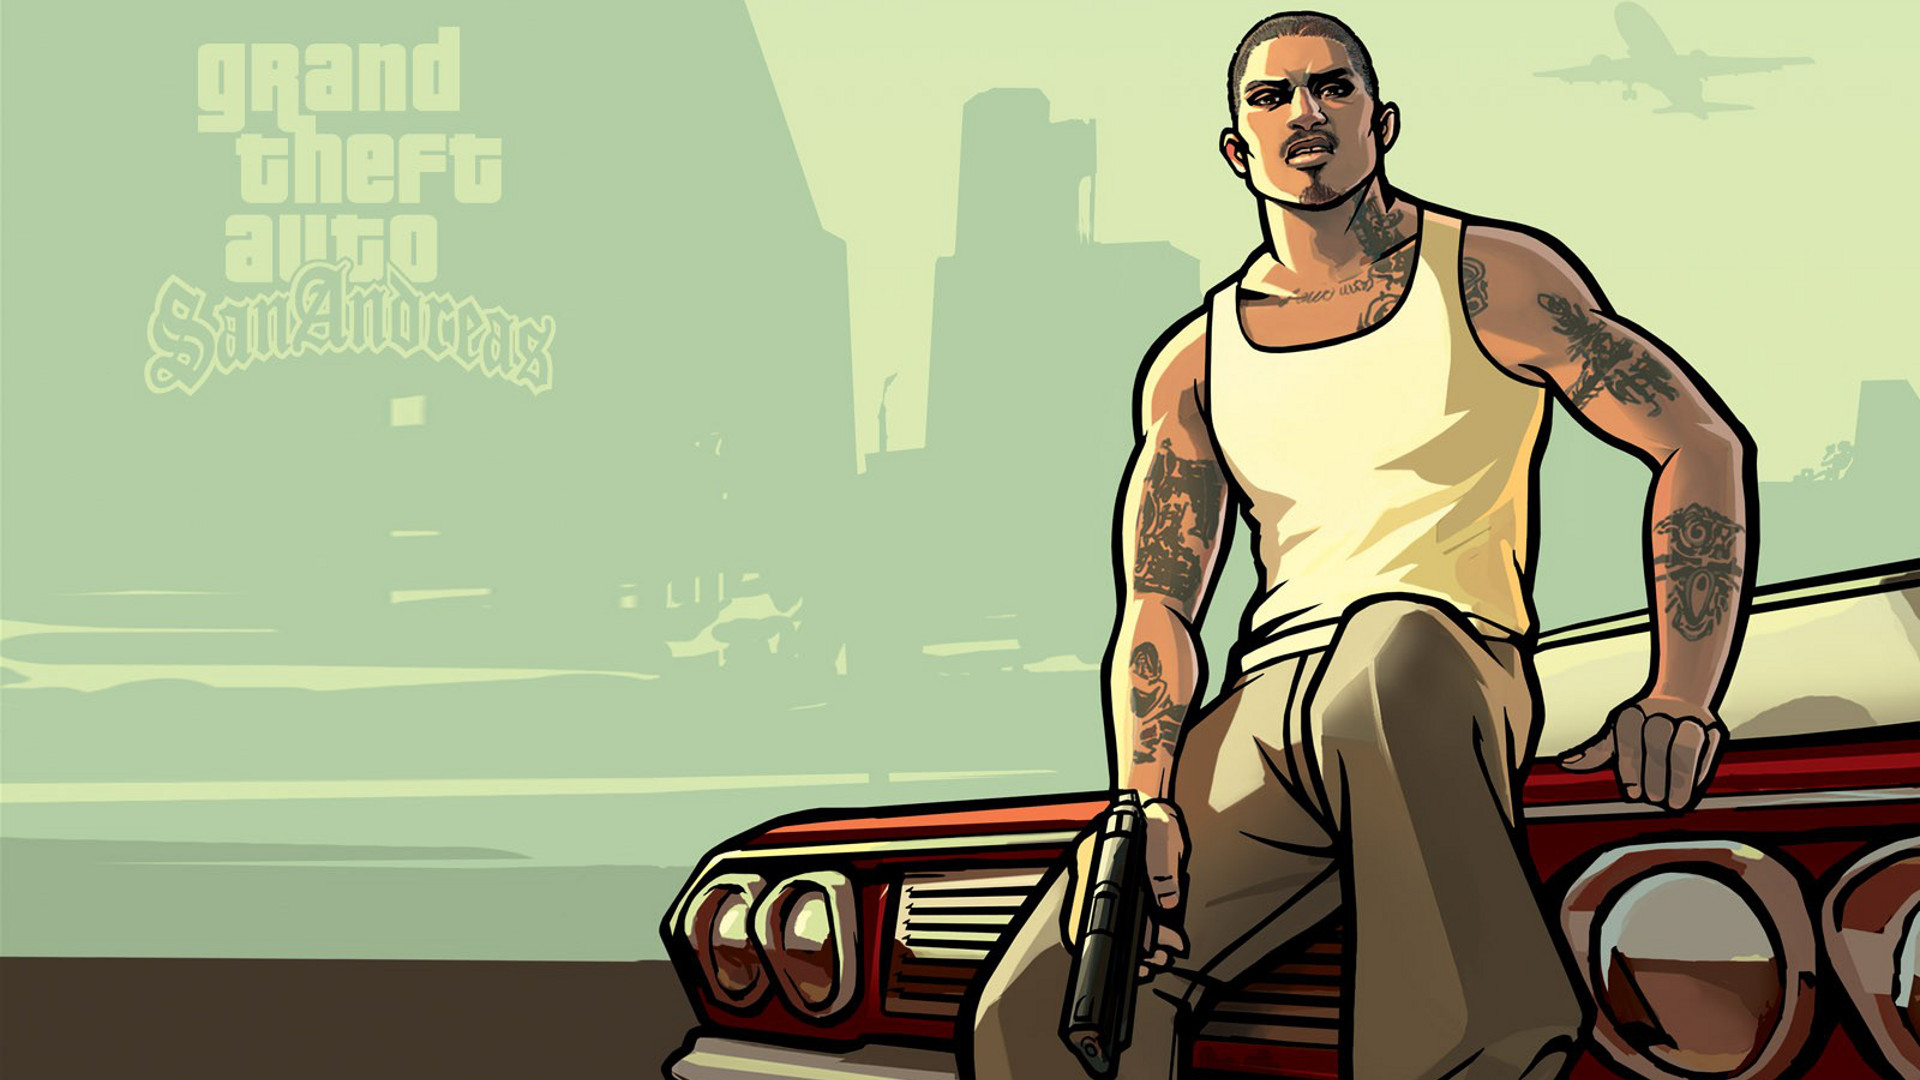 Cancelled Canon: San Andreas Hot coffee  - gta san andreas background